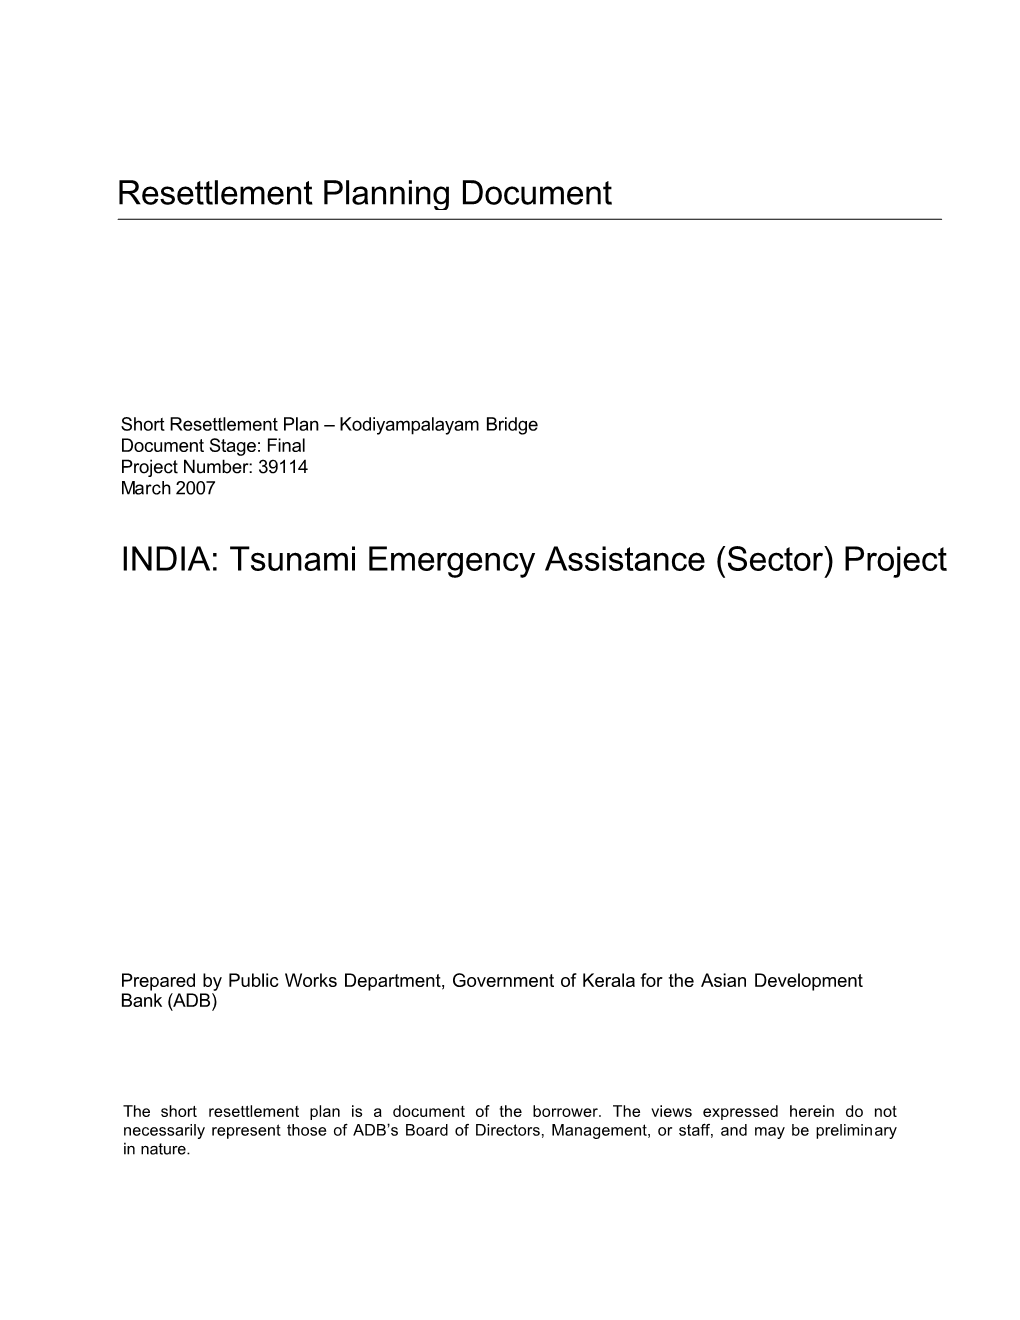 Tsunami Emergency Assistance (Sector) Project